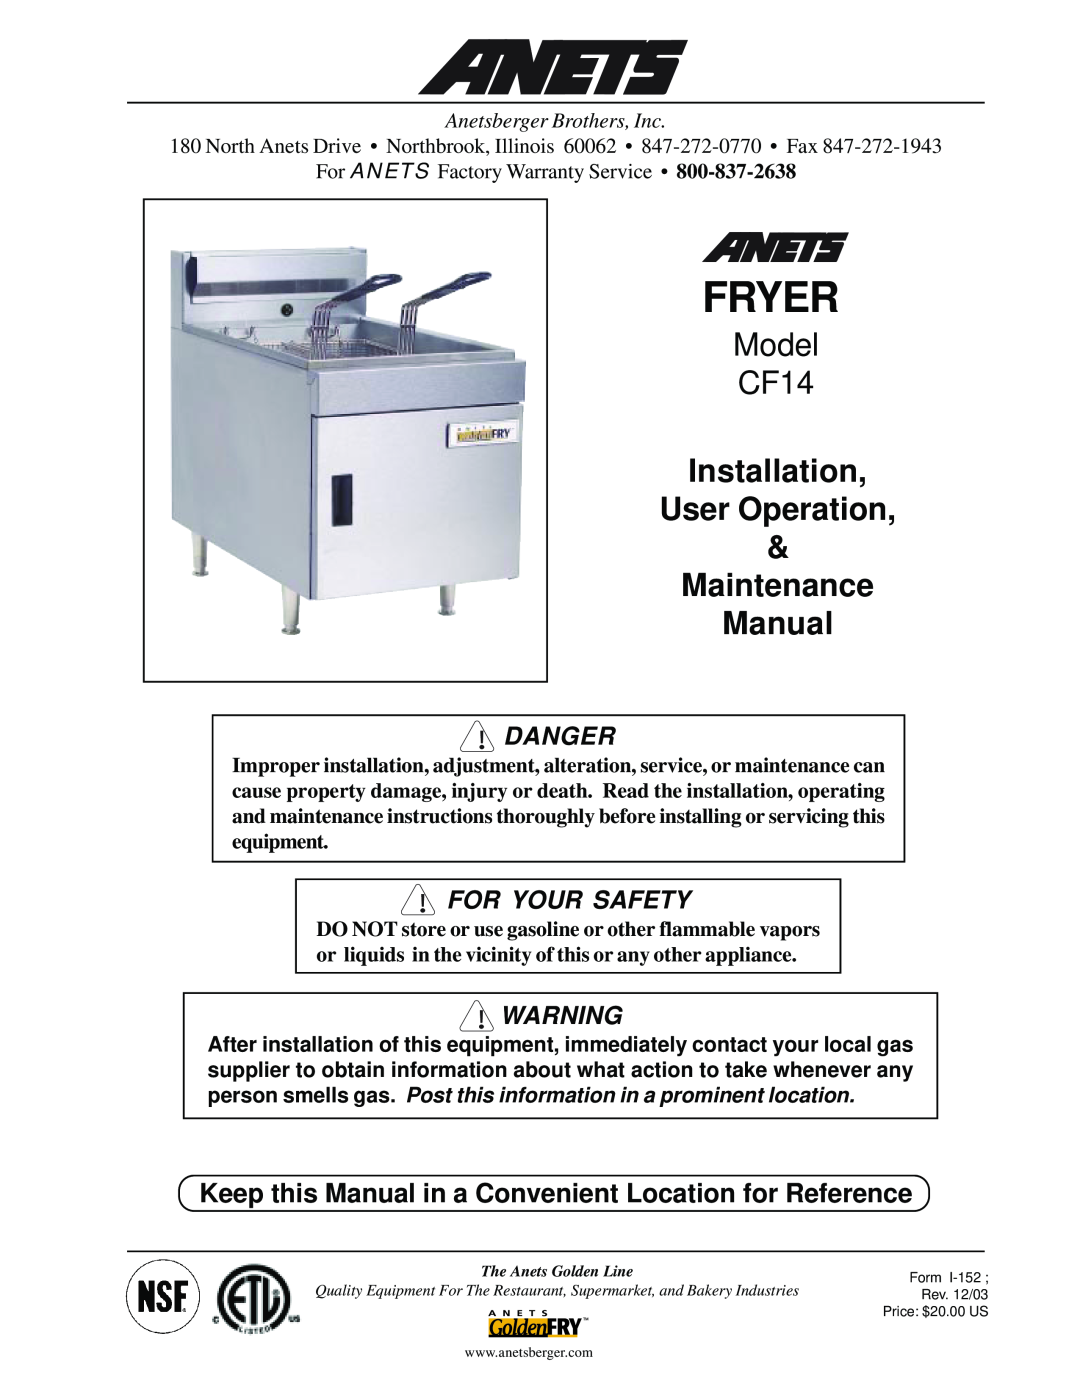 Anetsberger Brothers warranty Danger, For Your Safety, Anetsberger Brothers, Inc, Fryer, Model CF14 